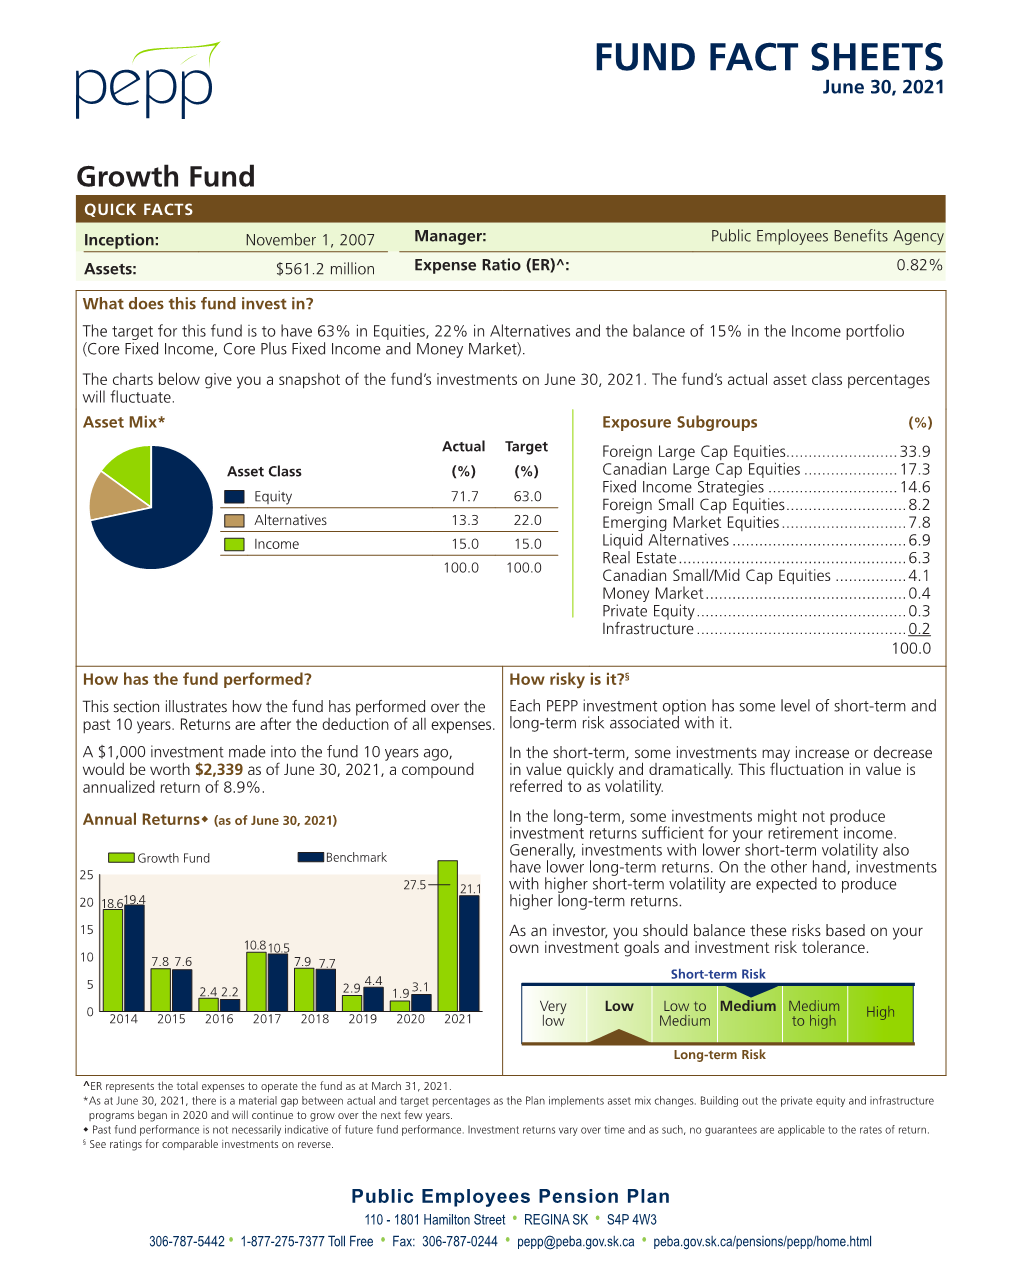 Growth Fund QUICK FACTS Inception: November 1, 2007 Manager: Public Employees Benefits Agency Assets: $561.2 Million Expense Ratio (ER)^: 0.82%